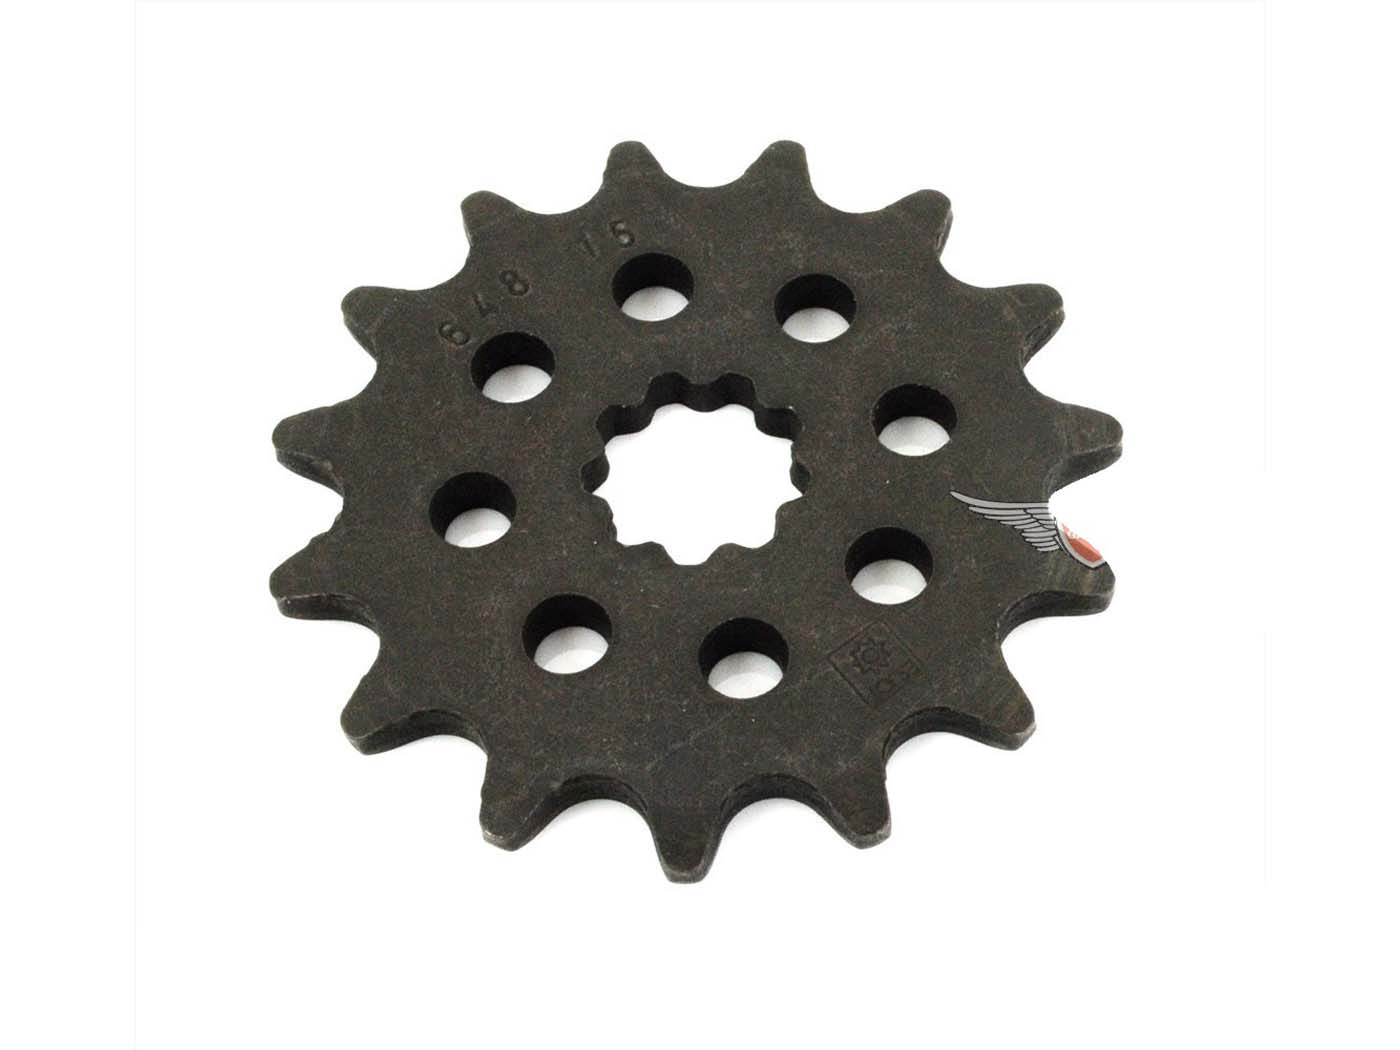 Chain Sprocket Esjot 15 Teeth Pitch 415 For Puch Moped